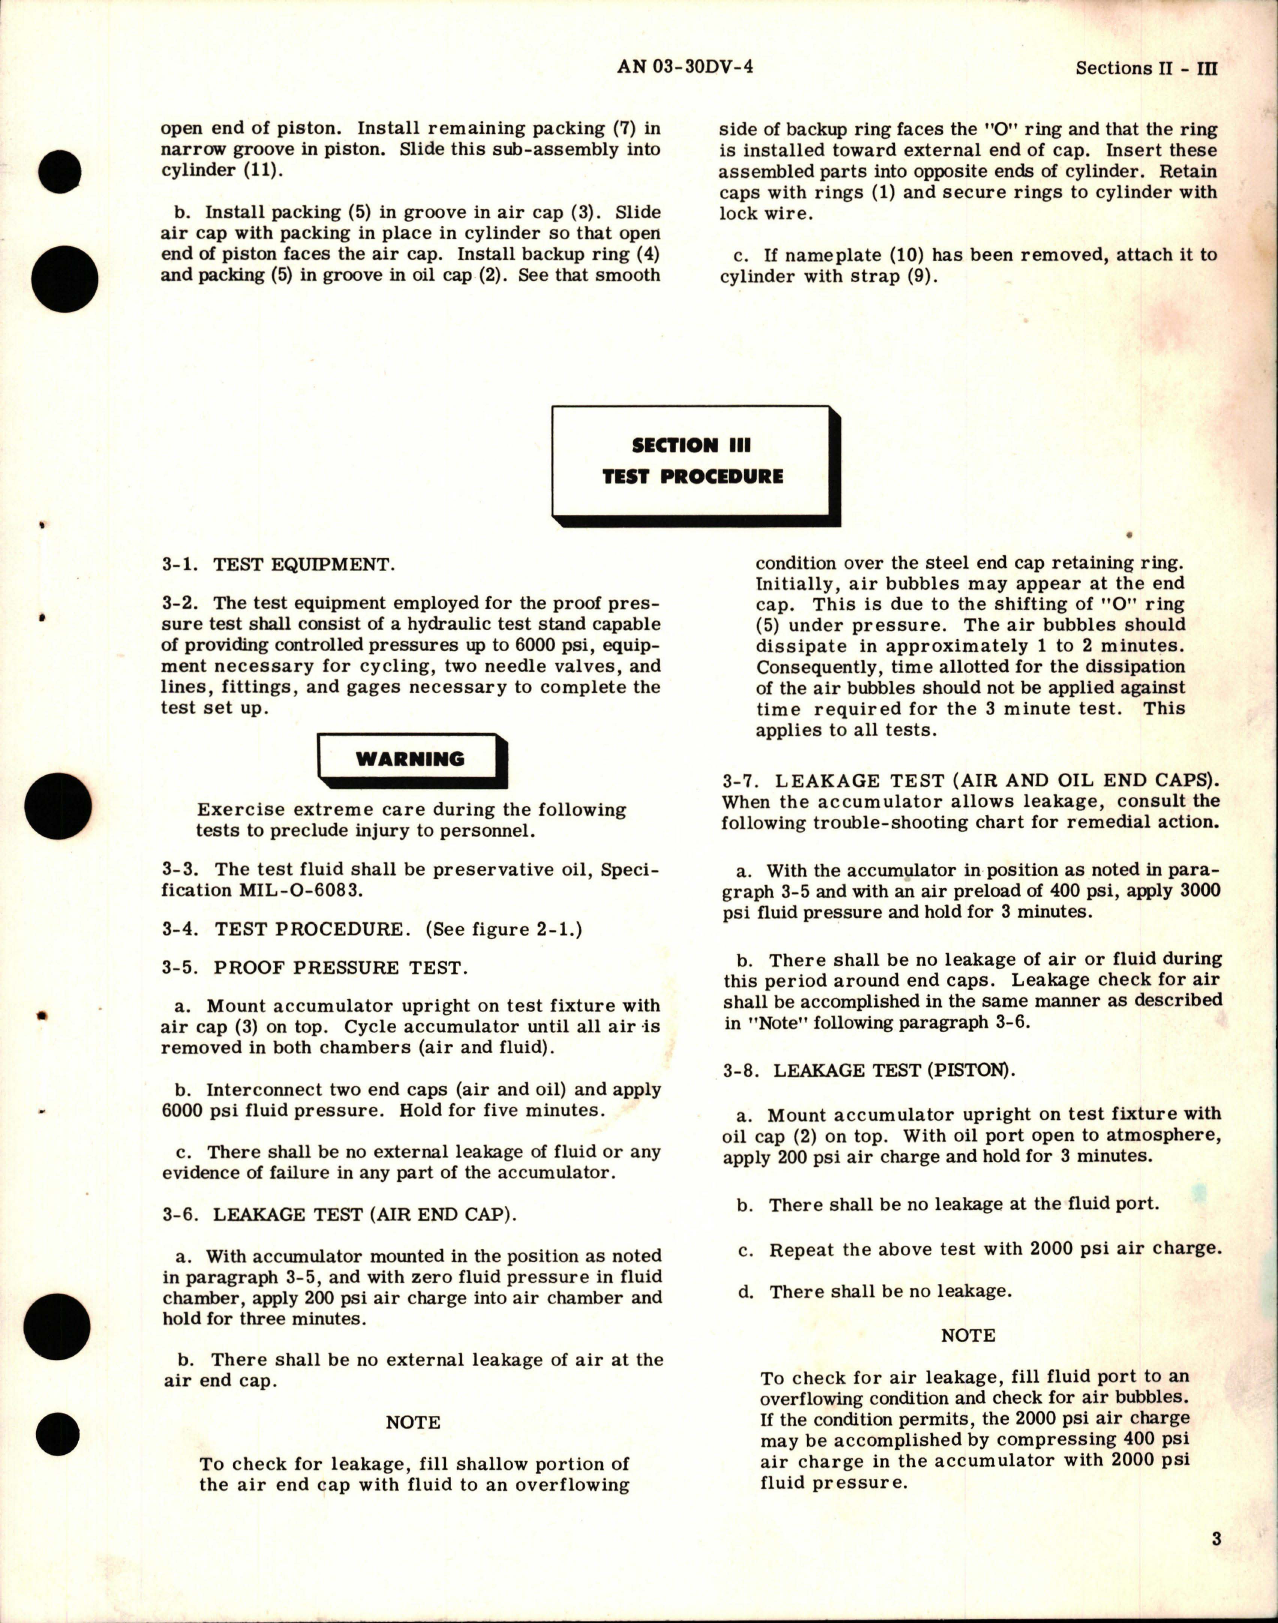 Sample page 7 from AirCorps Library document: Overhaul Instructions for Accumulators